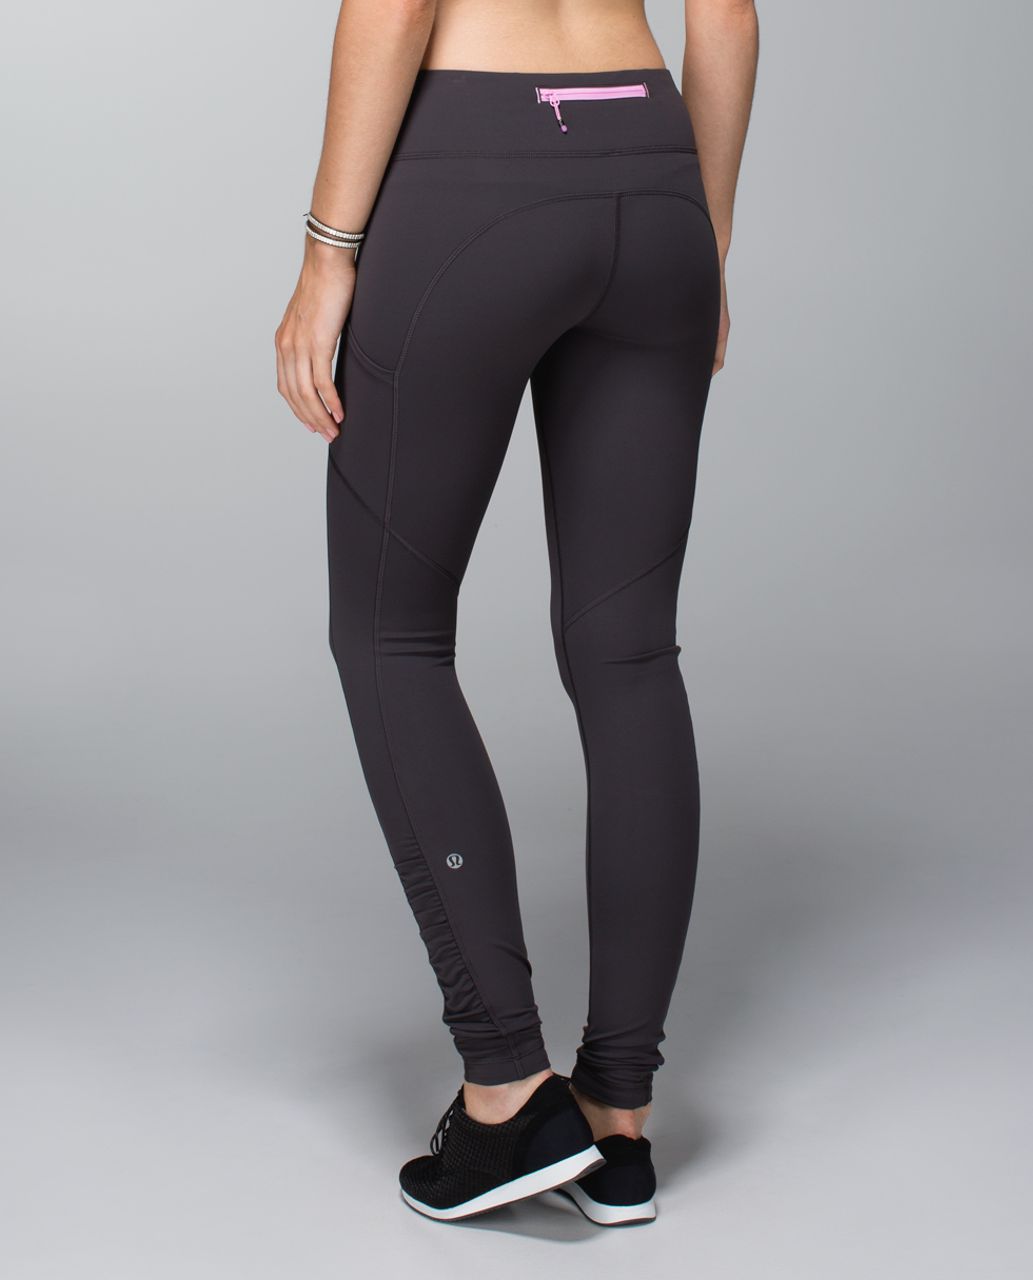 Lululemon Running In The City 7/8 Tight *Full-On Luxtreme